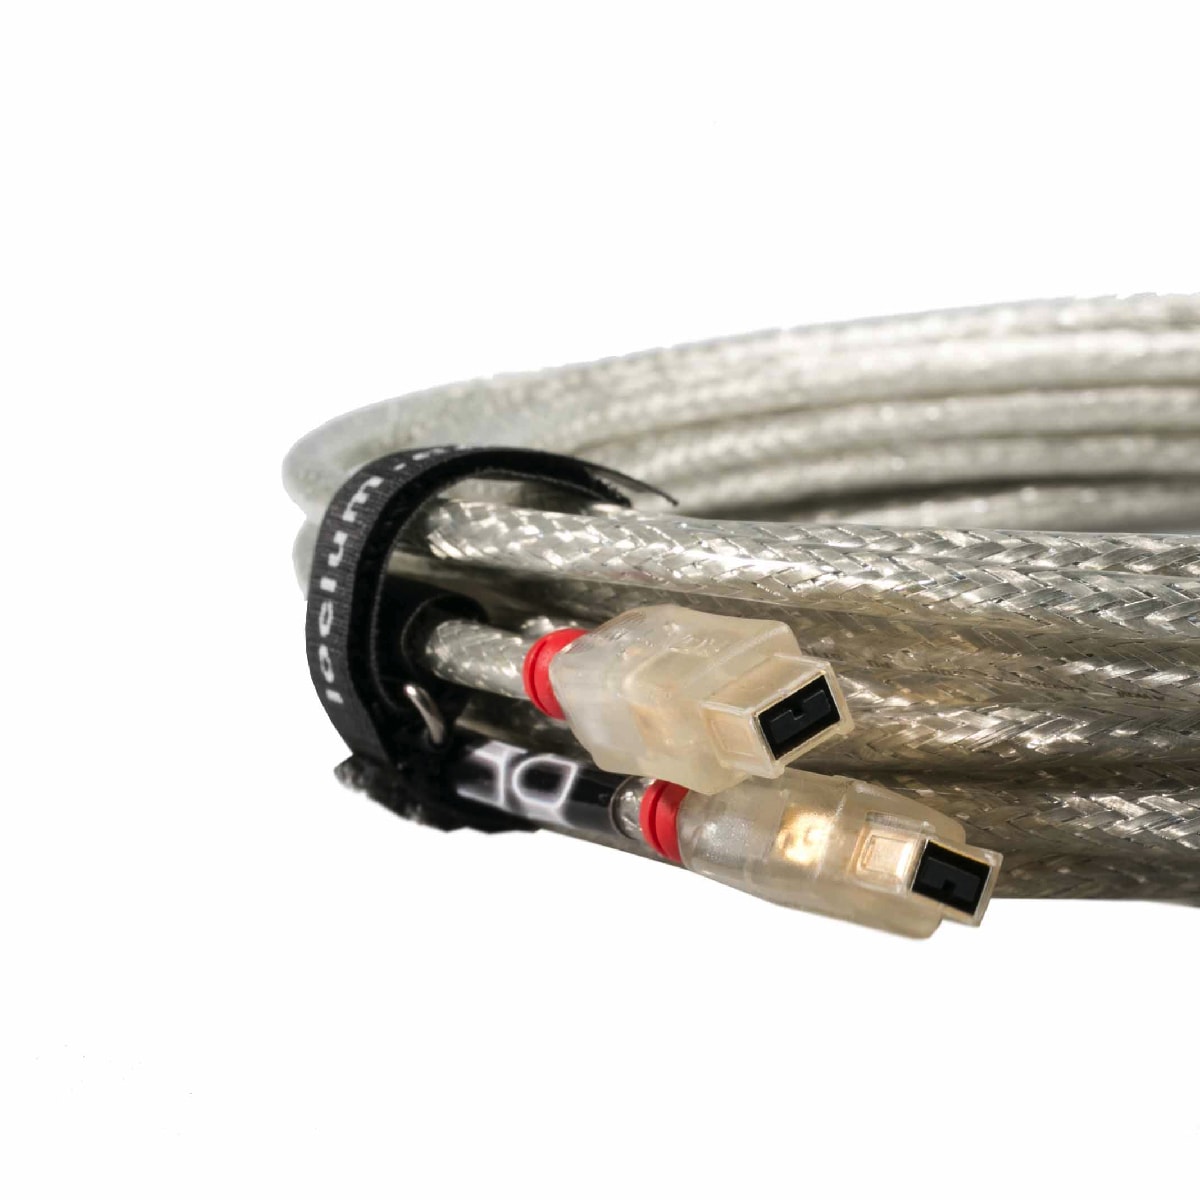  Firewire Cable (9pin/9pin), 5m